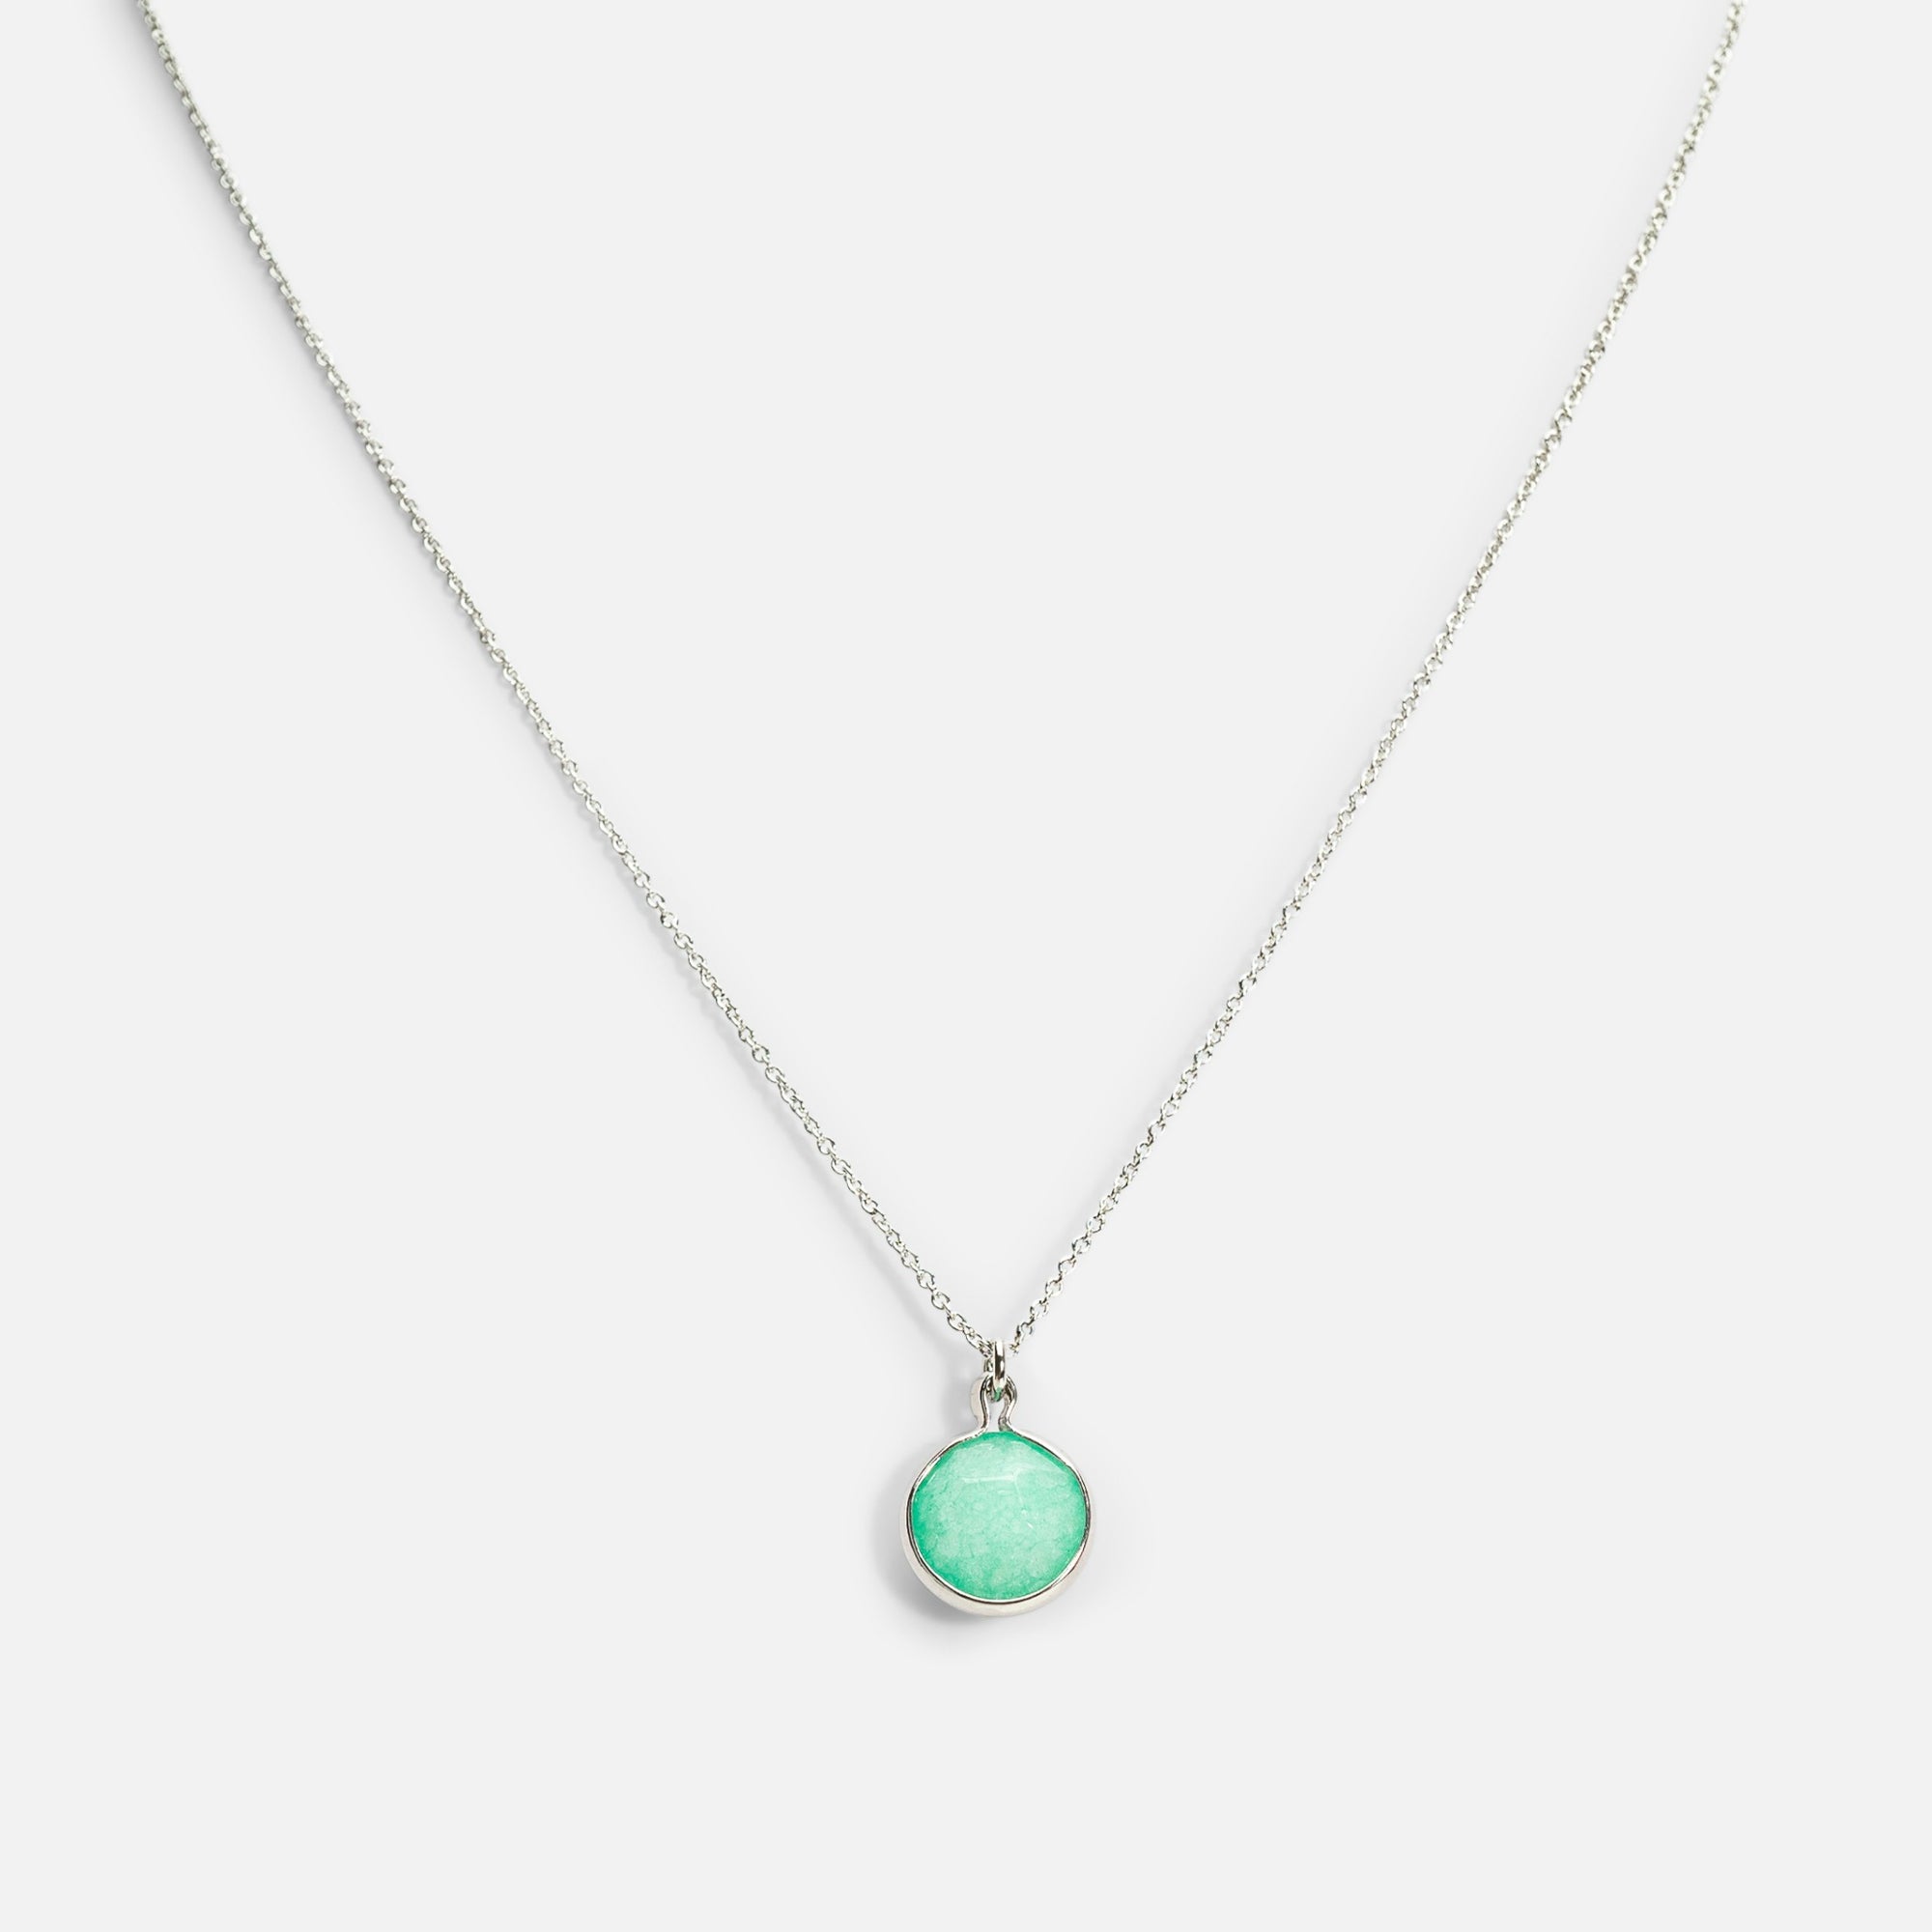 Silver pendant with mint charm 